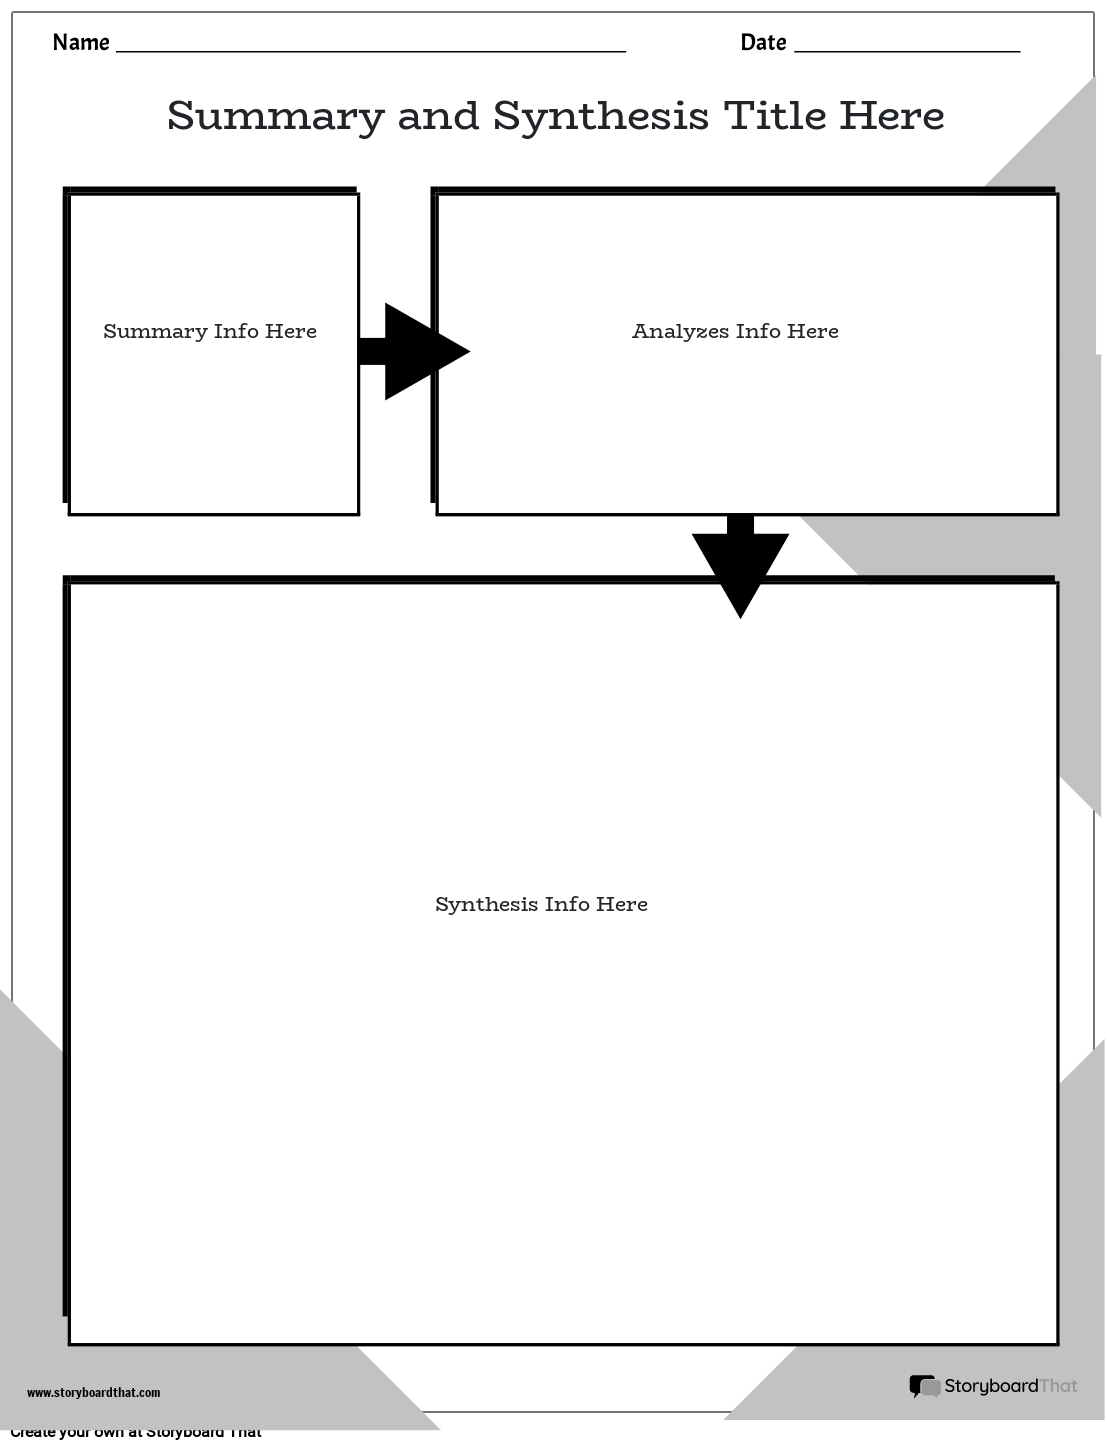 New Create Page Summary & Synthesis Template 1 (Black & White)